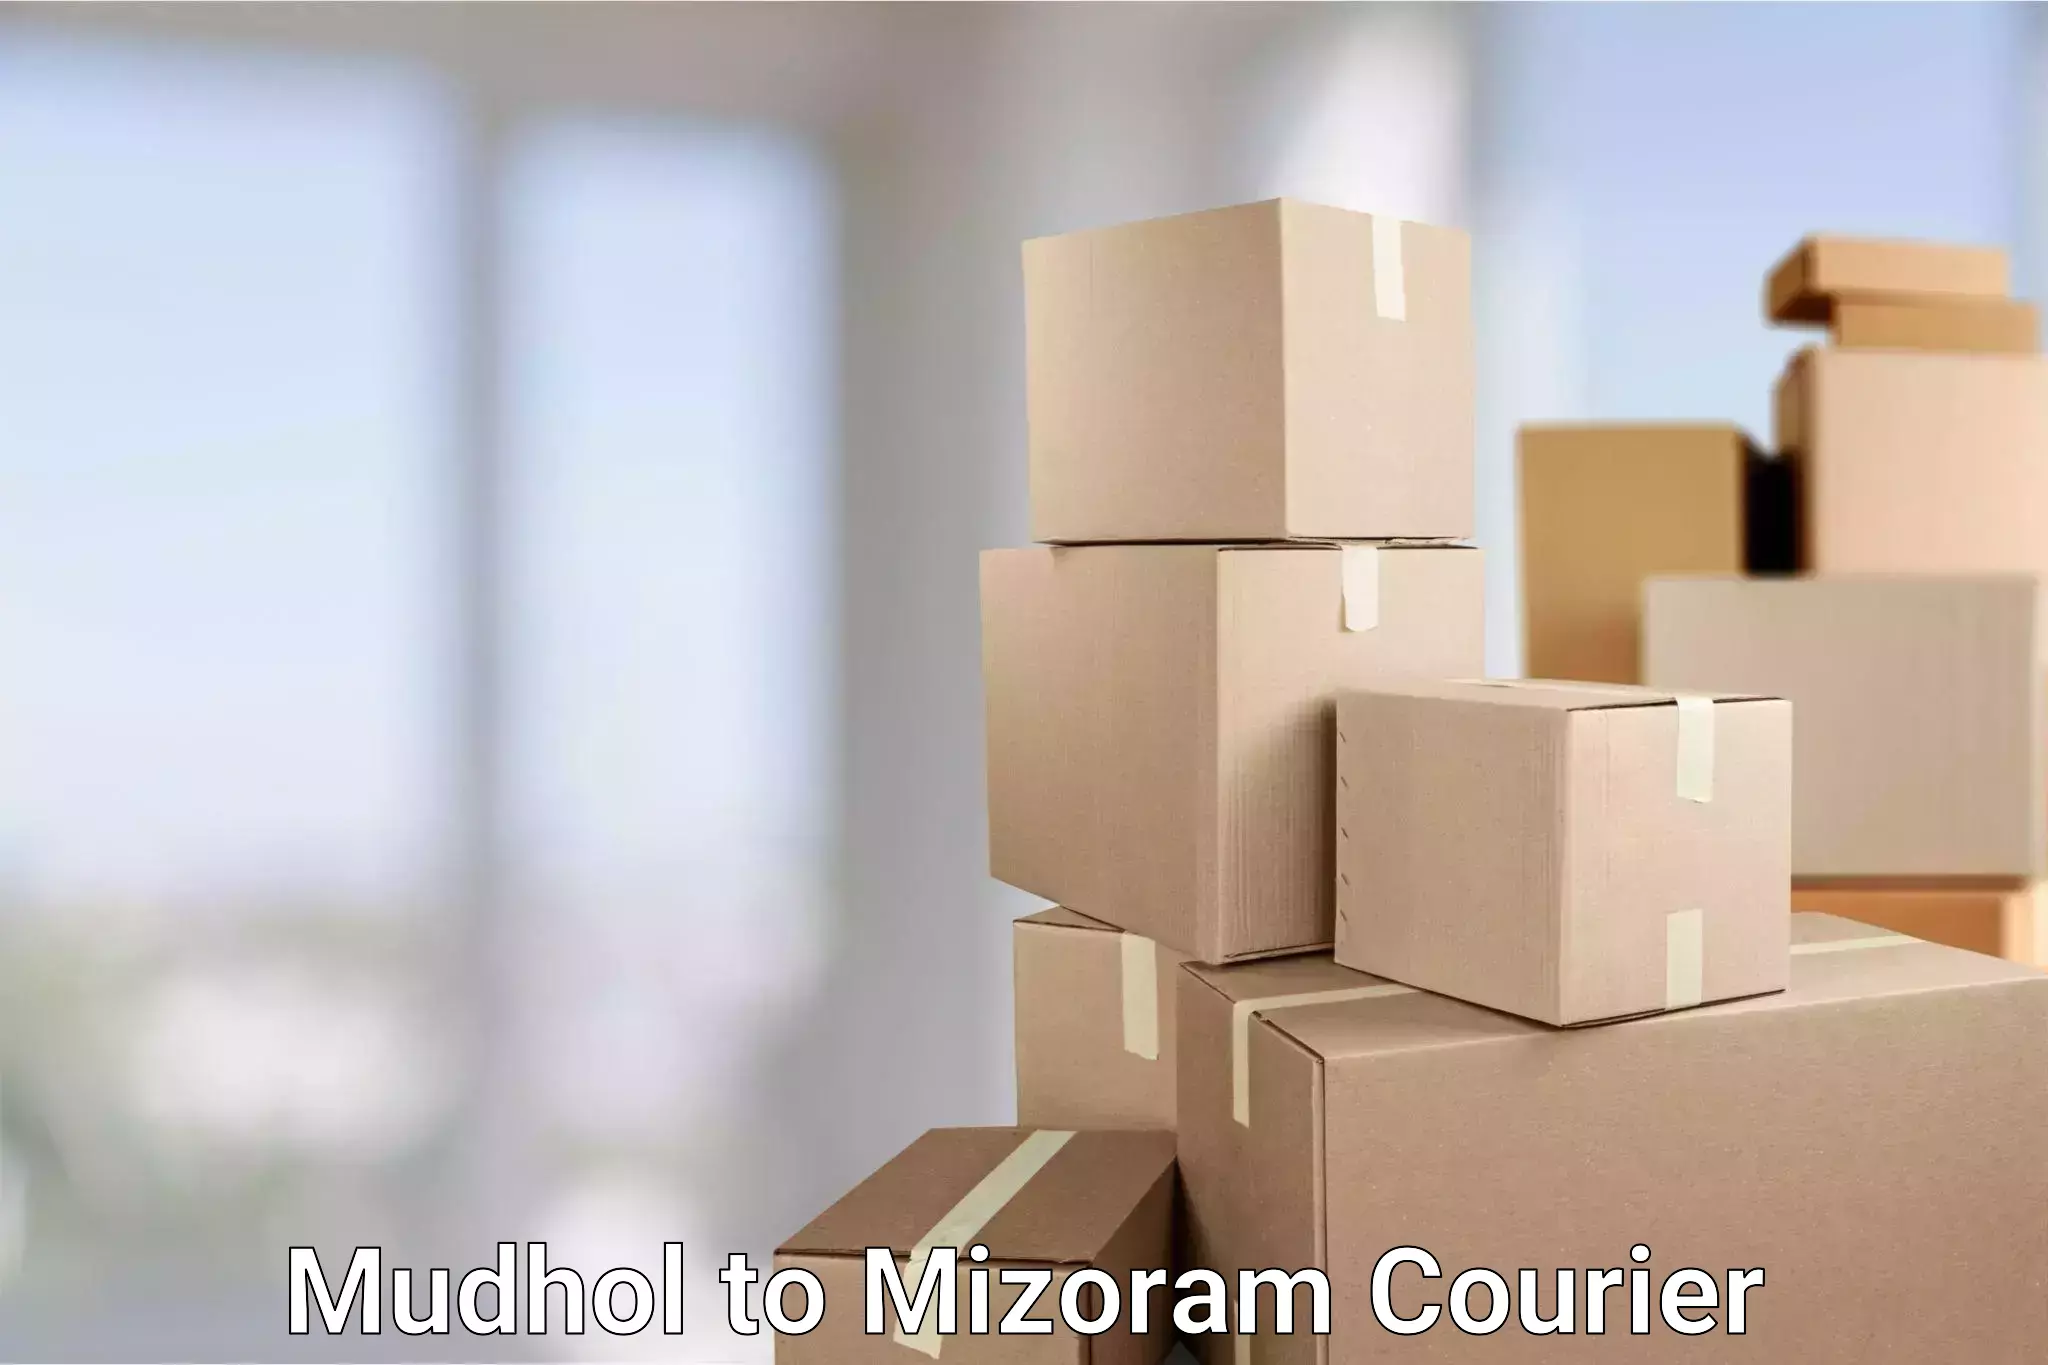 End-to-end delivery Mudhol to Aizawl